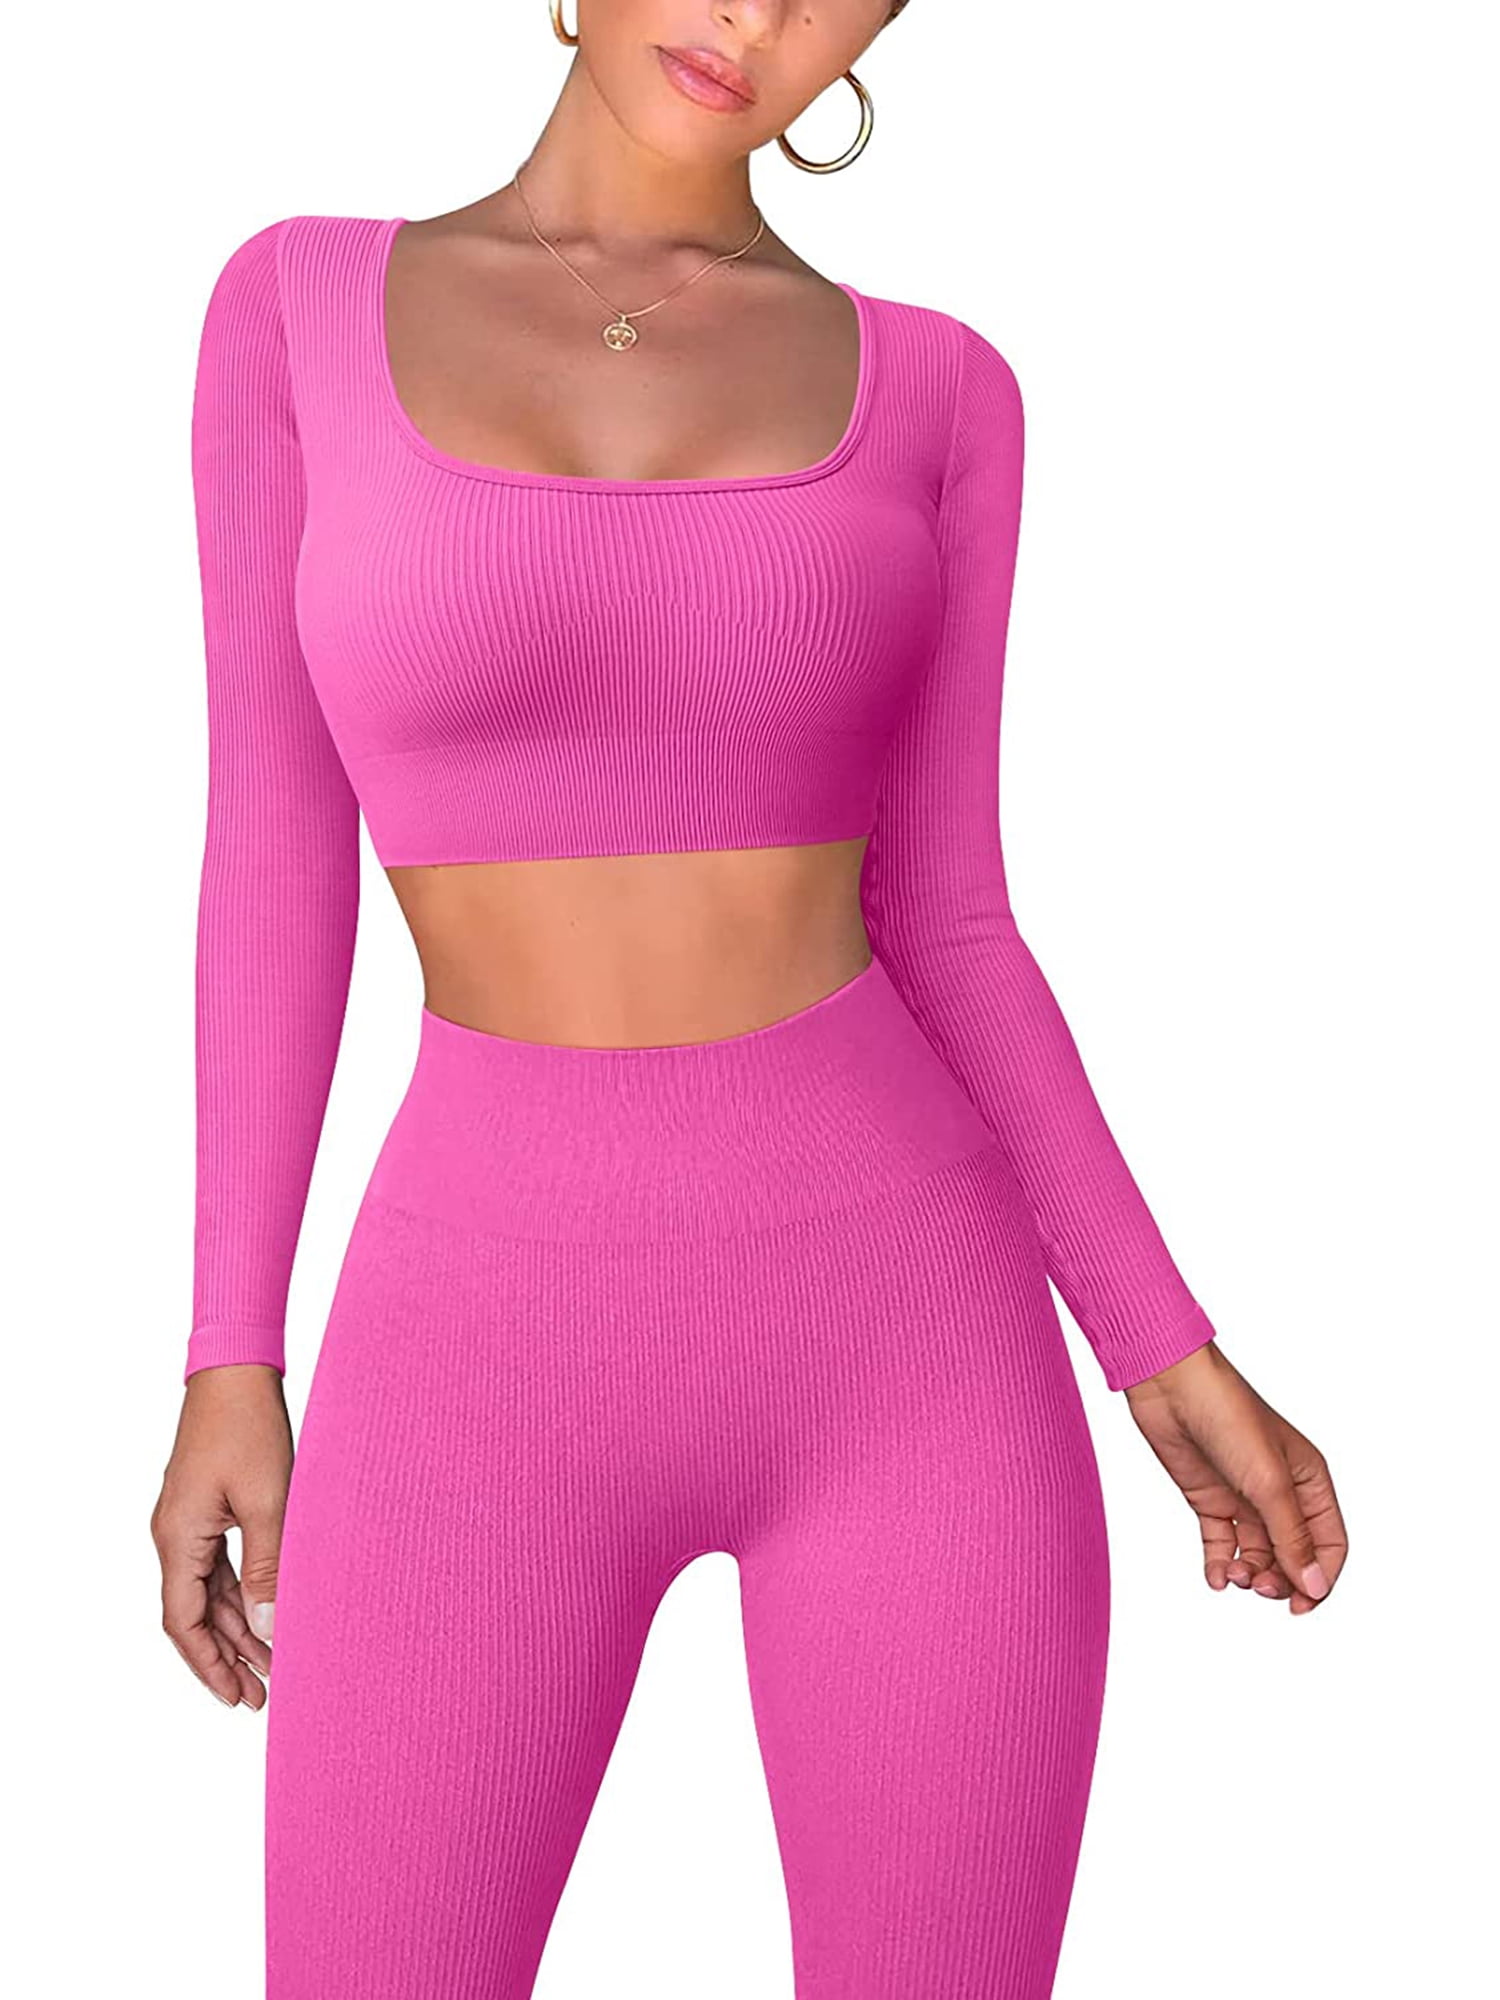 Women's 2 Piece Workout Outfits Sexy Skinny Long Sleeve Crop Top